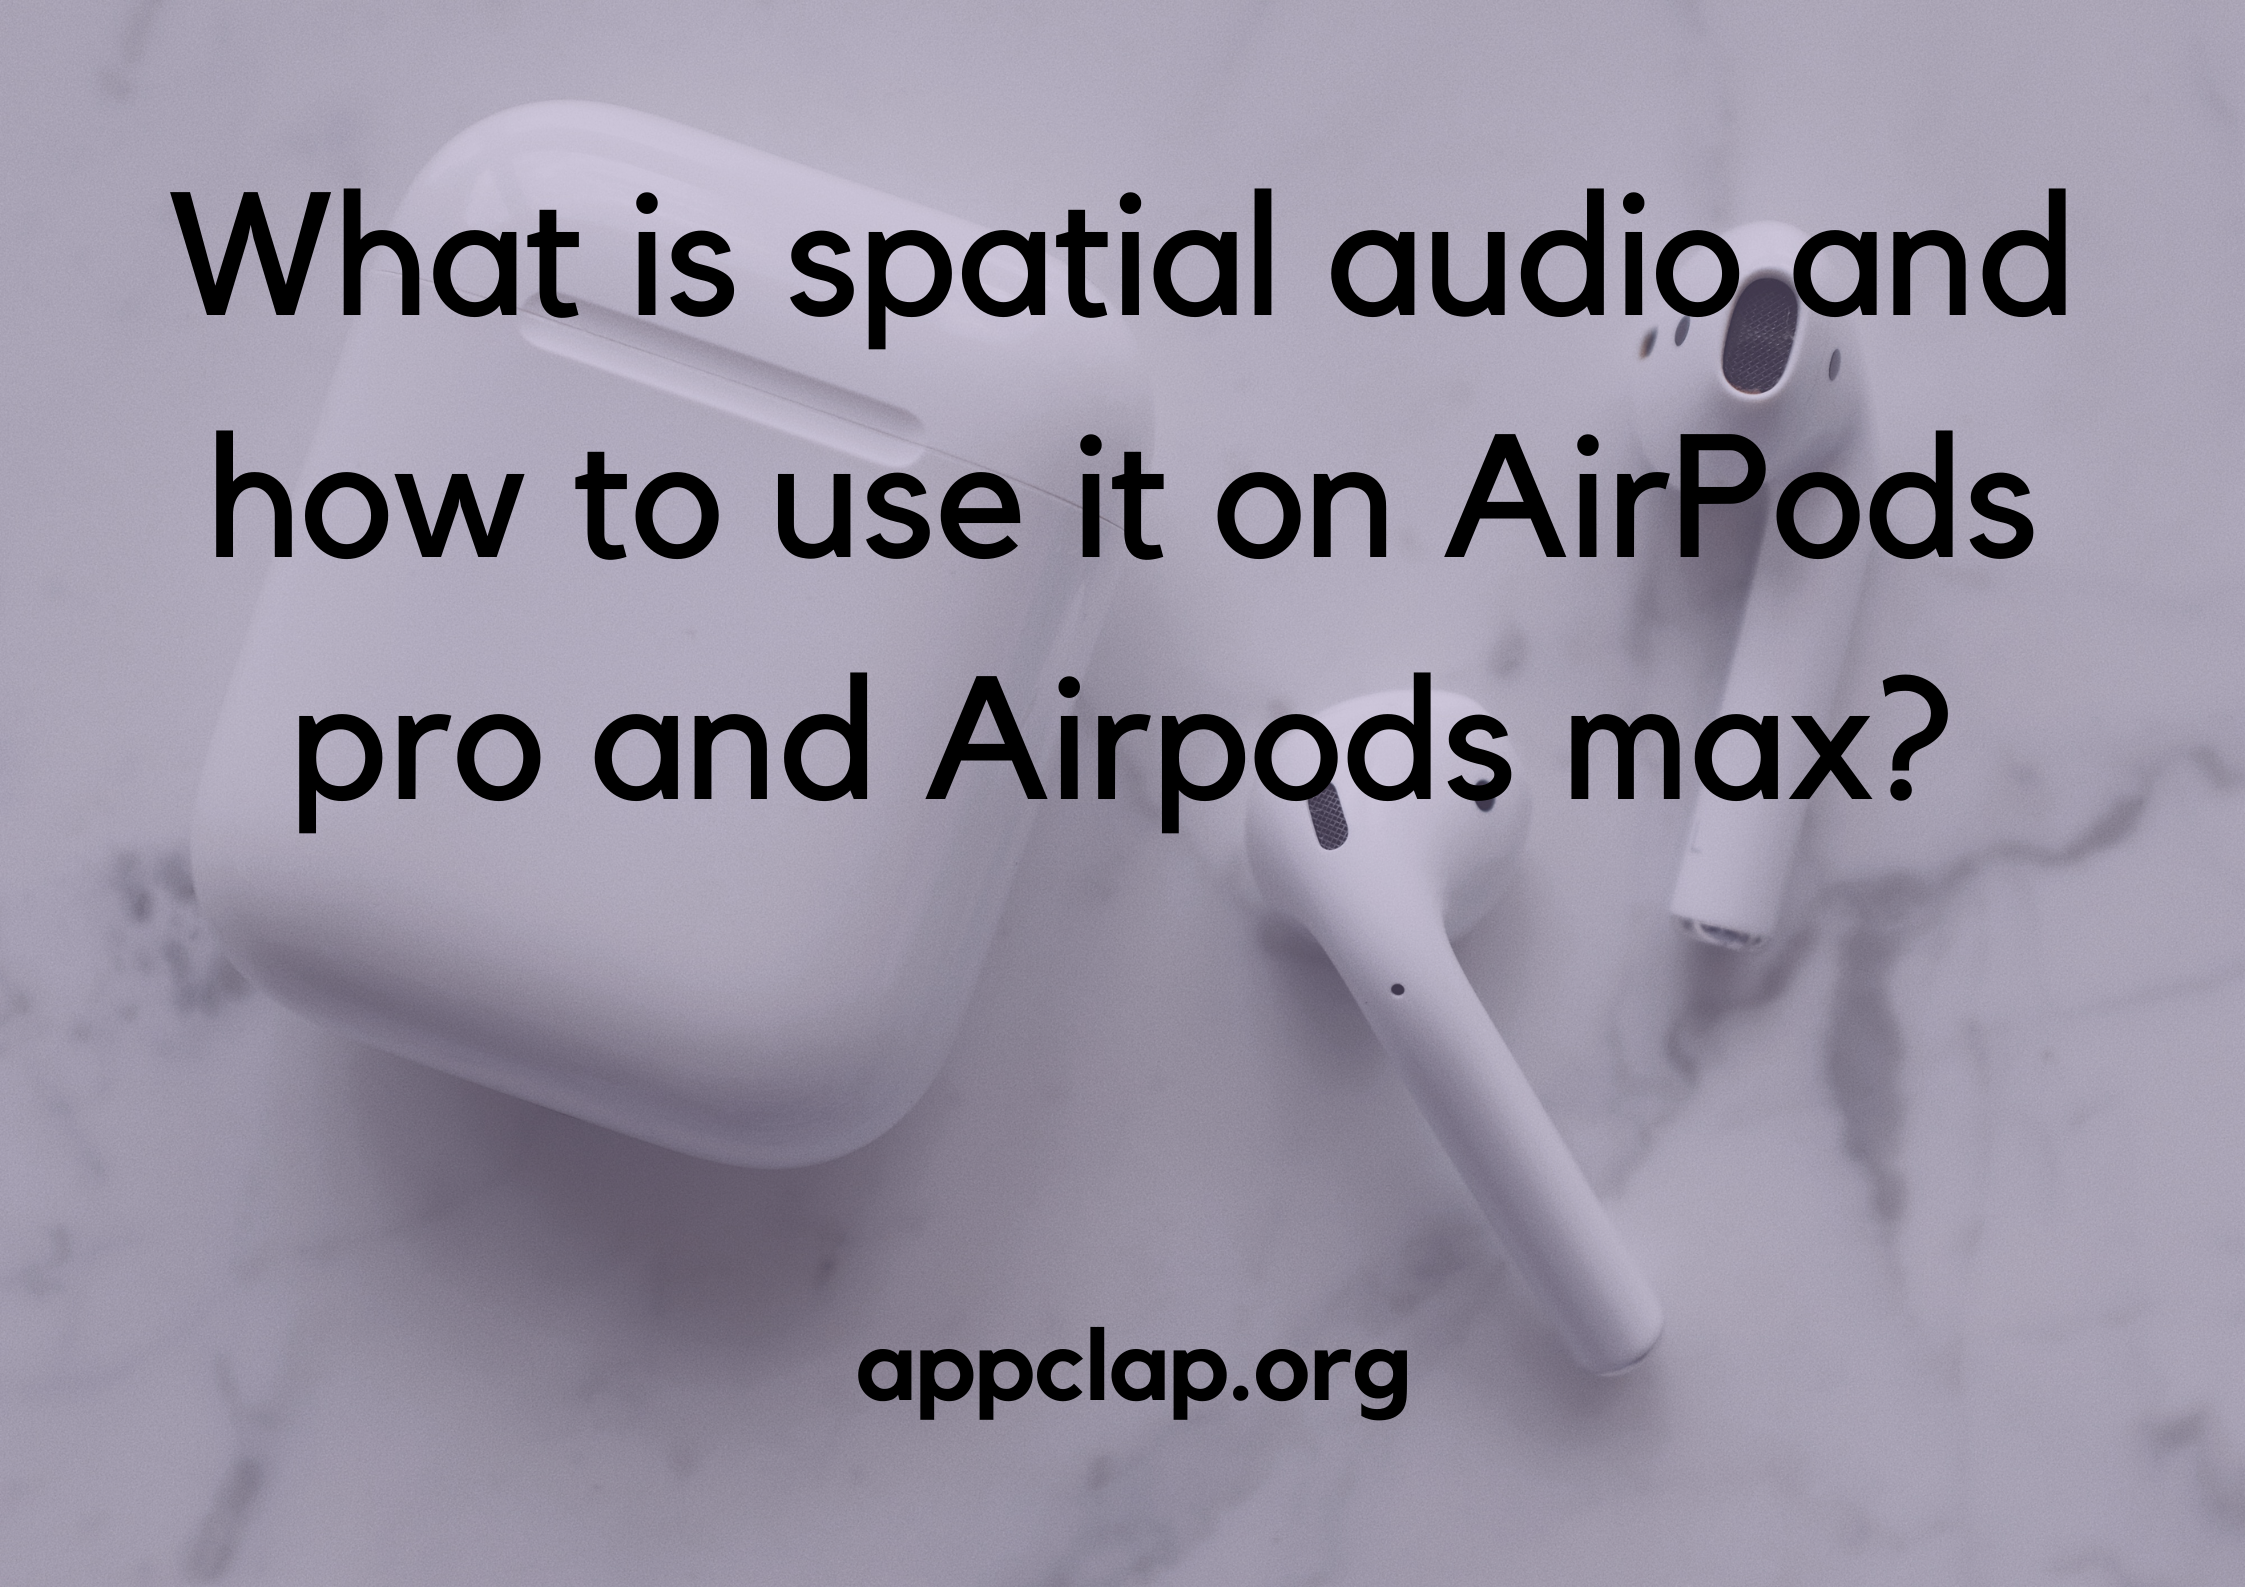 What is spatial audio and how to use it on AirPods pro and Airpods max?